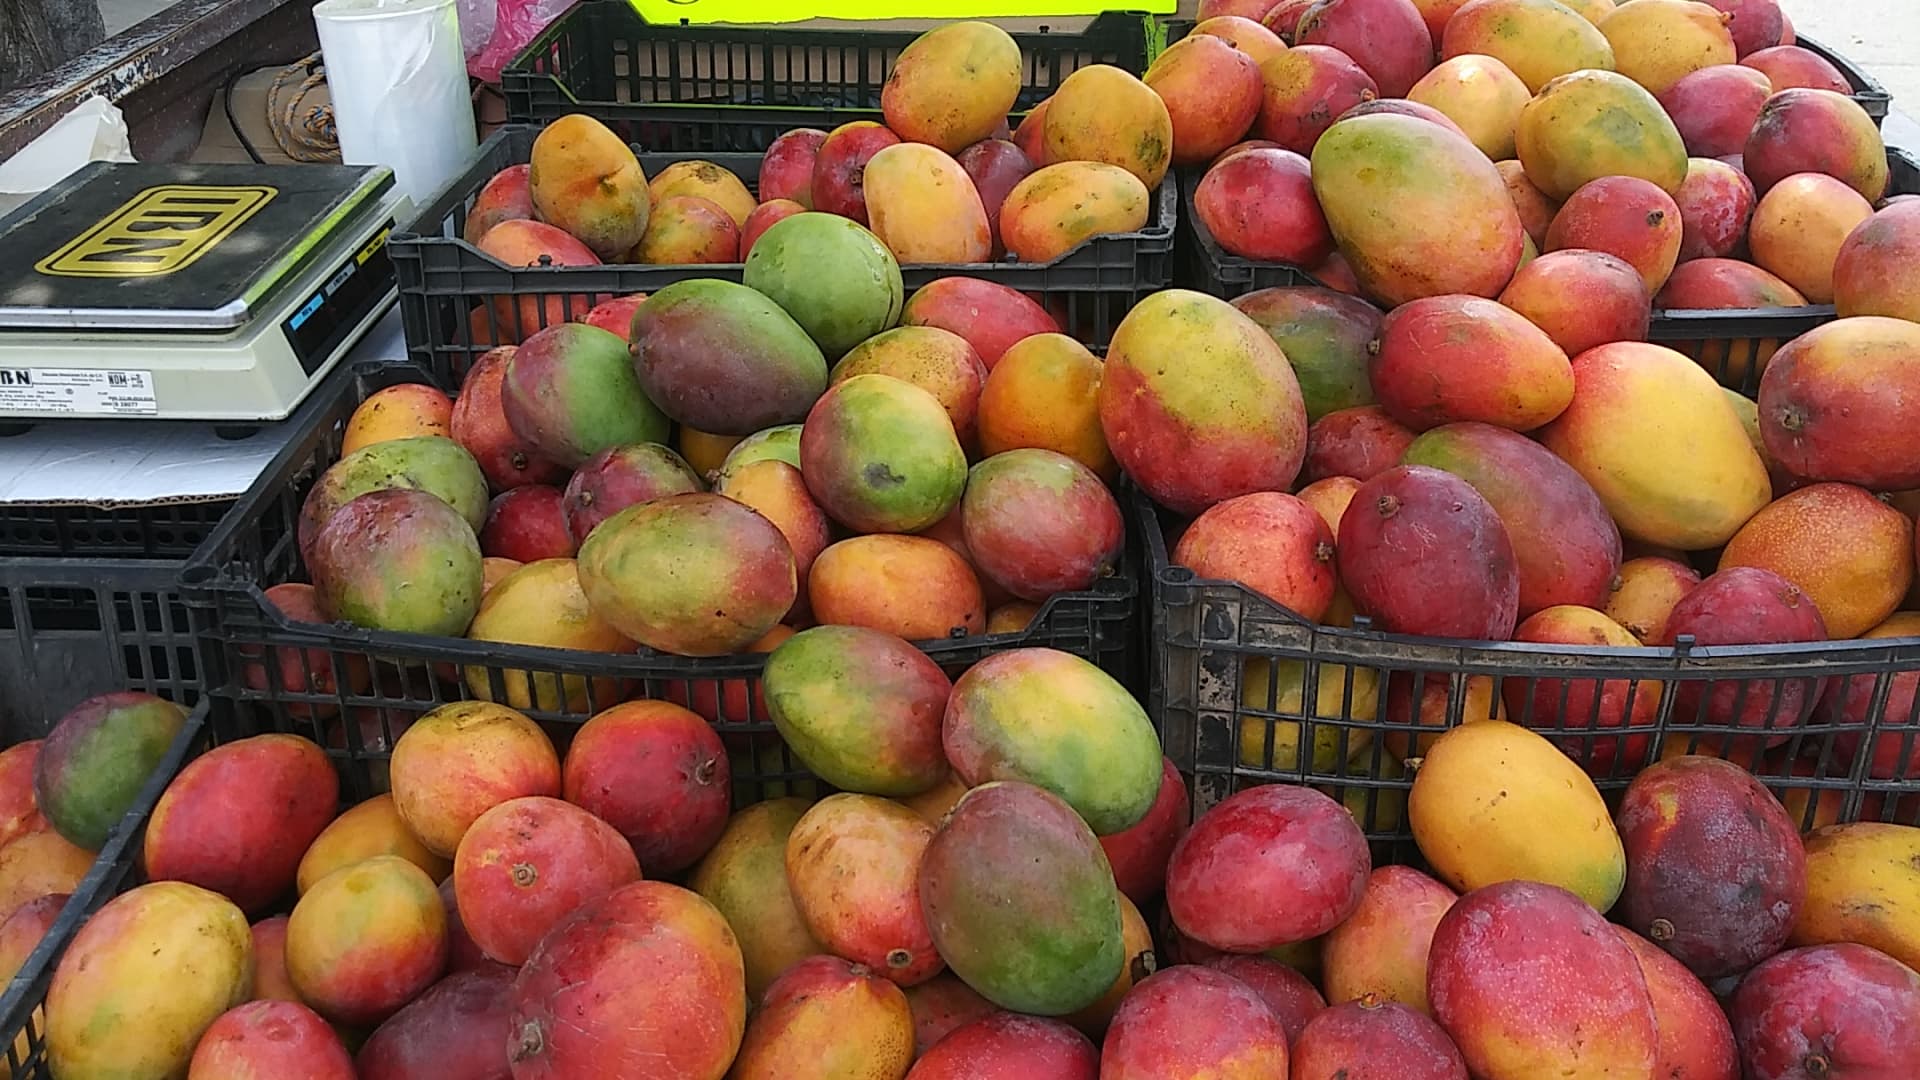 Love mangos? They’re grown all over Mexico and really are “cheaper by the dozen!” This vendor near me was selling them for less than 50 cents a pound. 